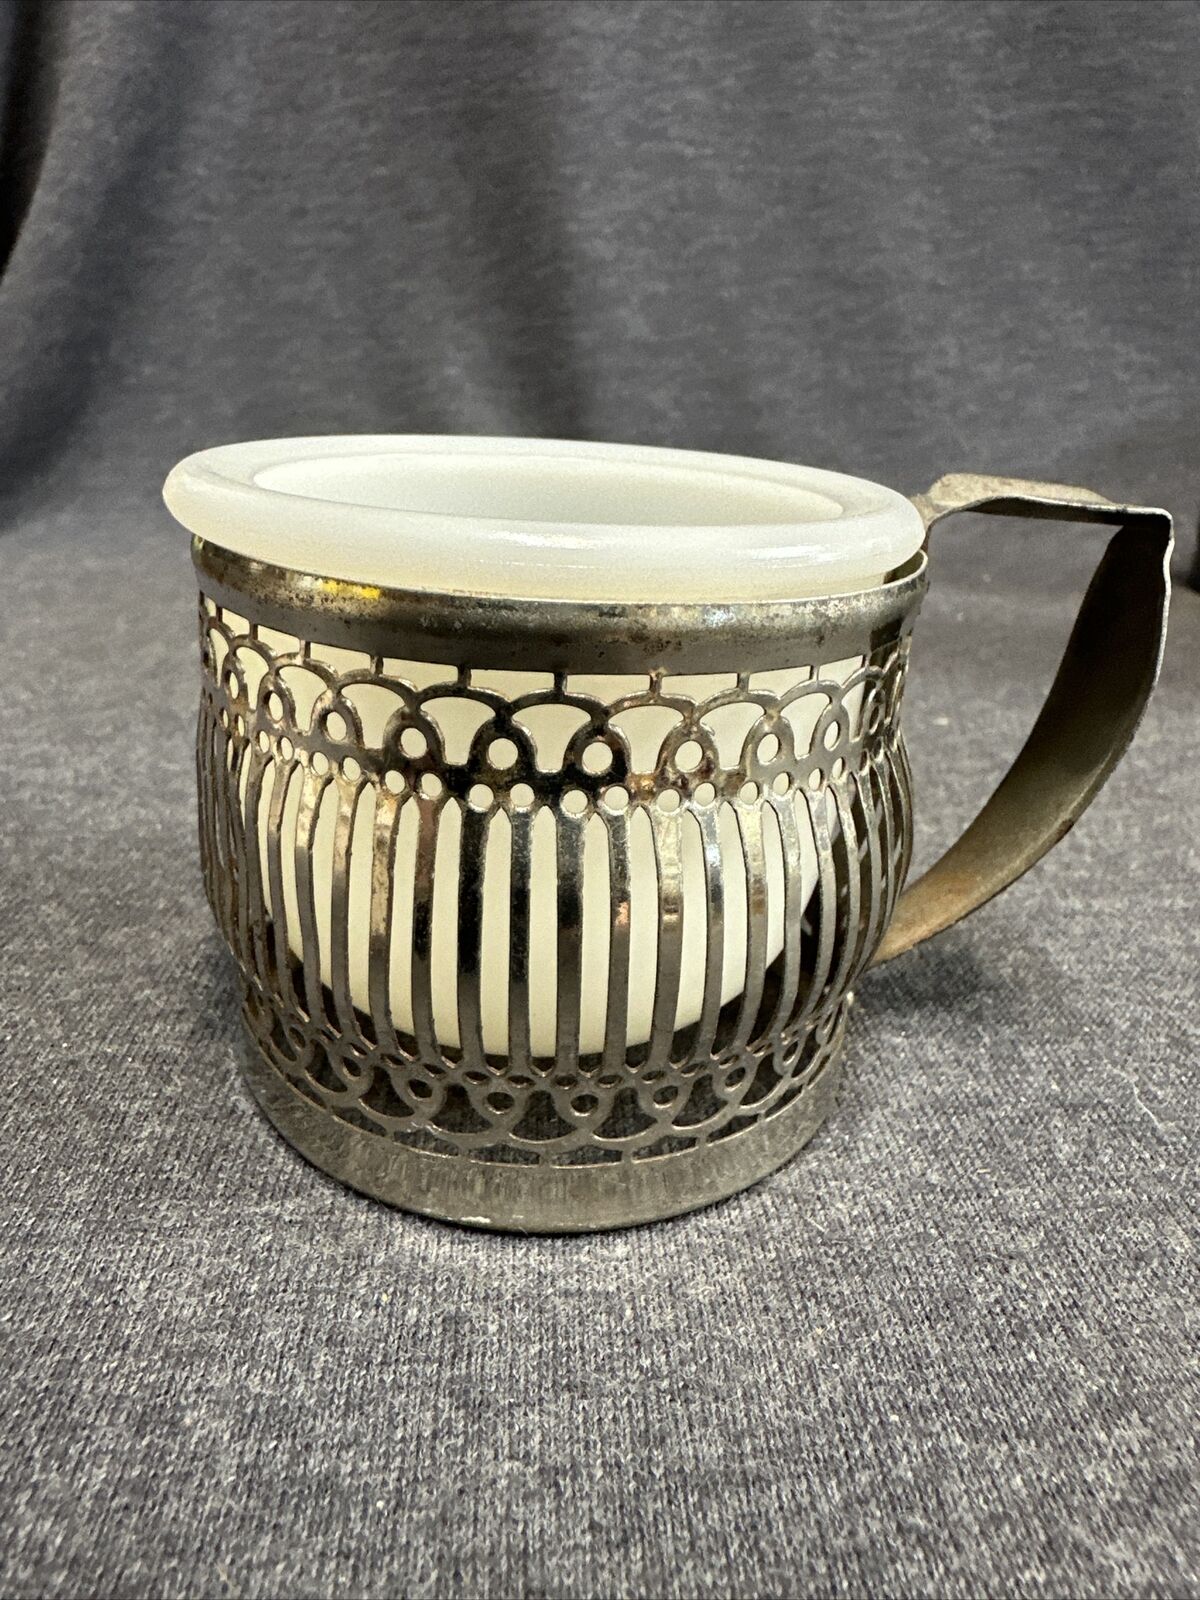 Vintage Silver Plated Shaving Mug With A Milk Glass Insert